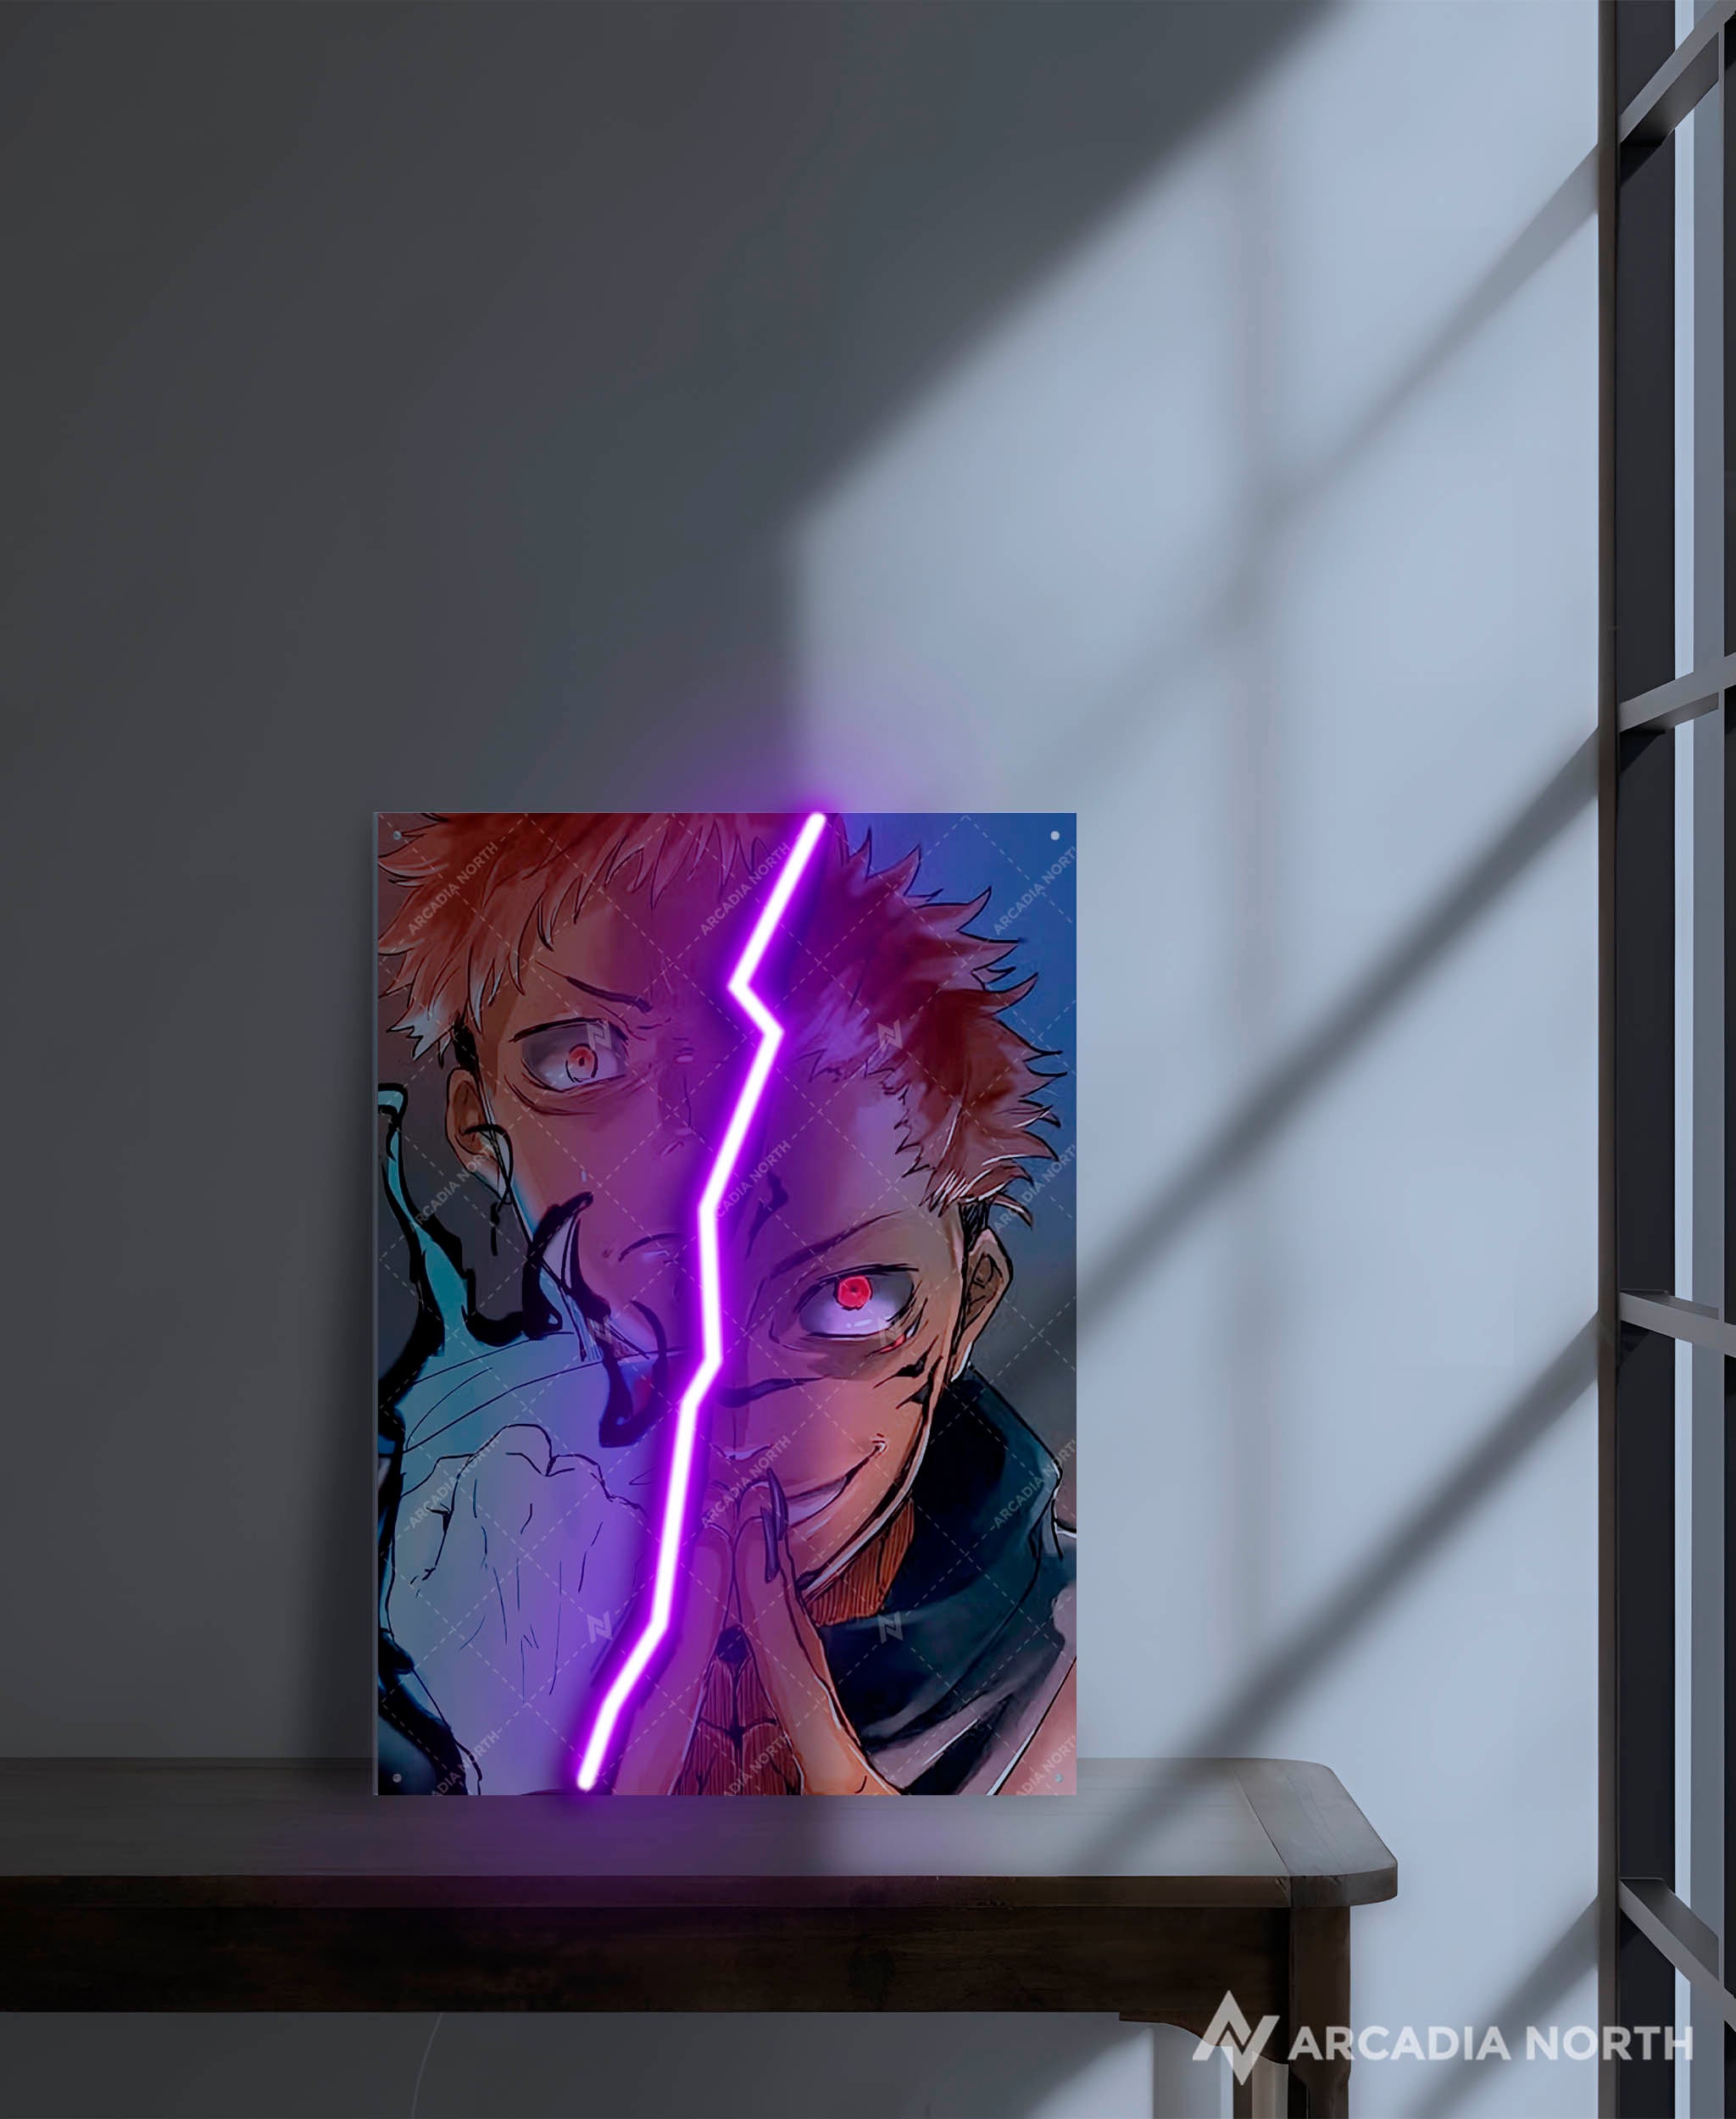 Arcadia North AURALIGHT - an LED Poster featuring the anime Jujutsu Kaisen with Yuji Itadori and Ryomen Sukuna. The split between the two characters is illuminated by LED neon lights. UV-printed poster on acrylic.